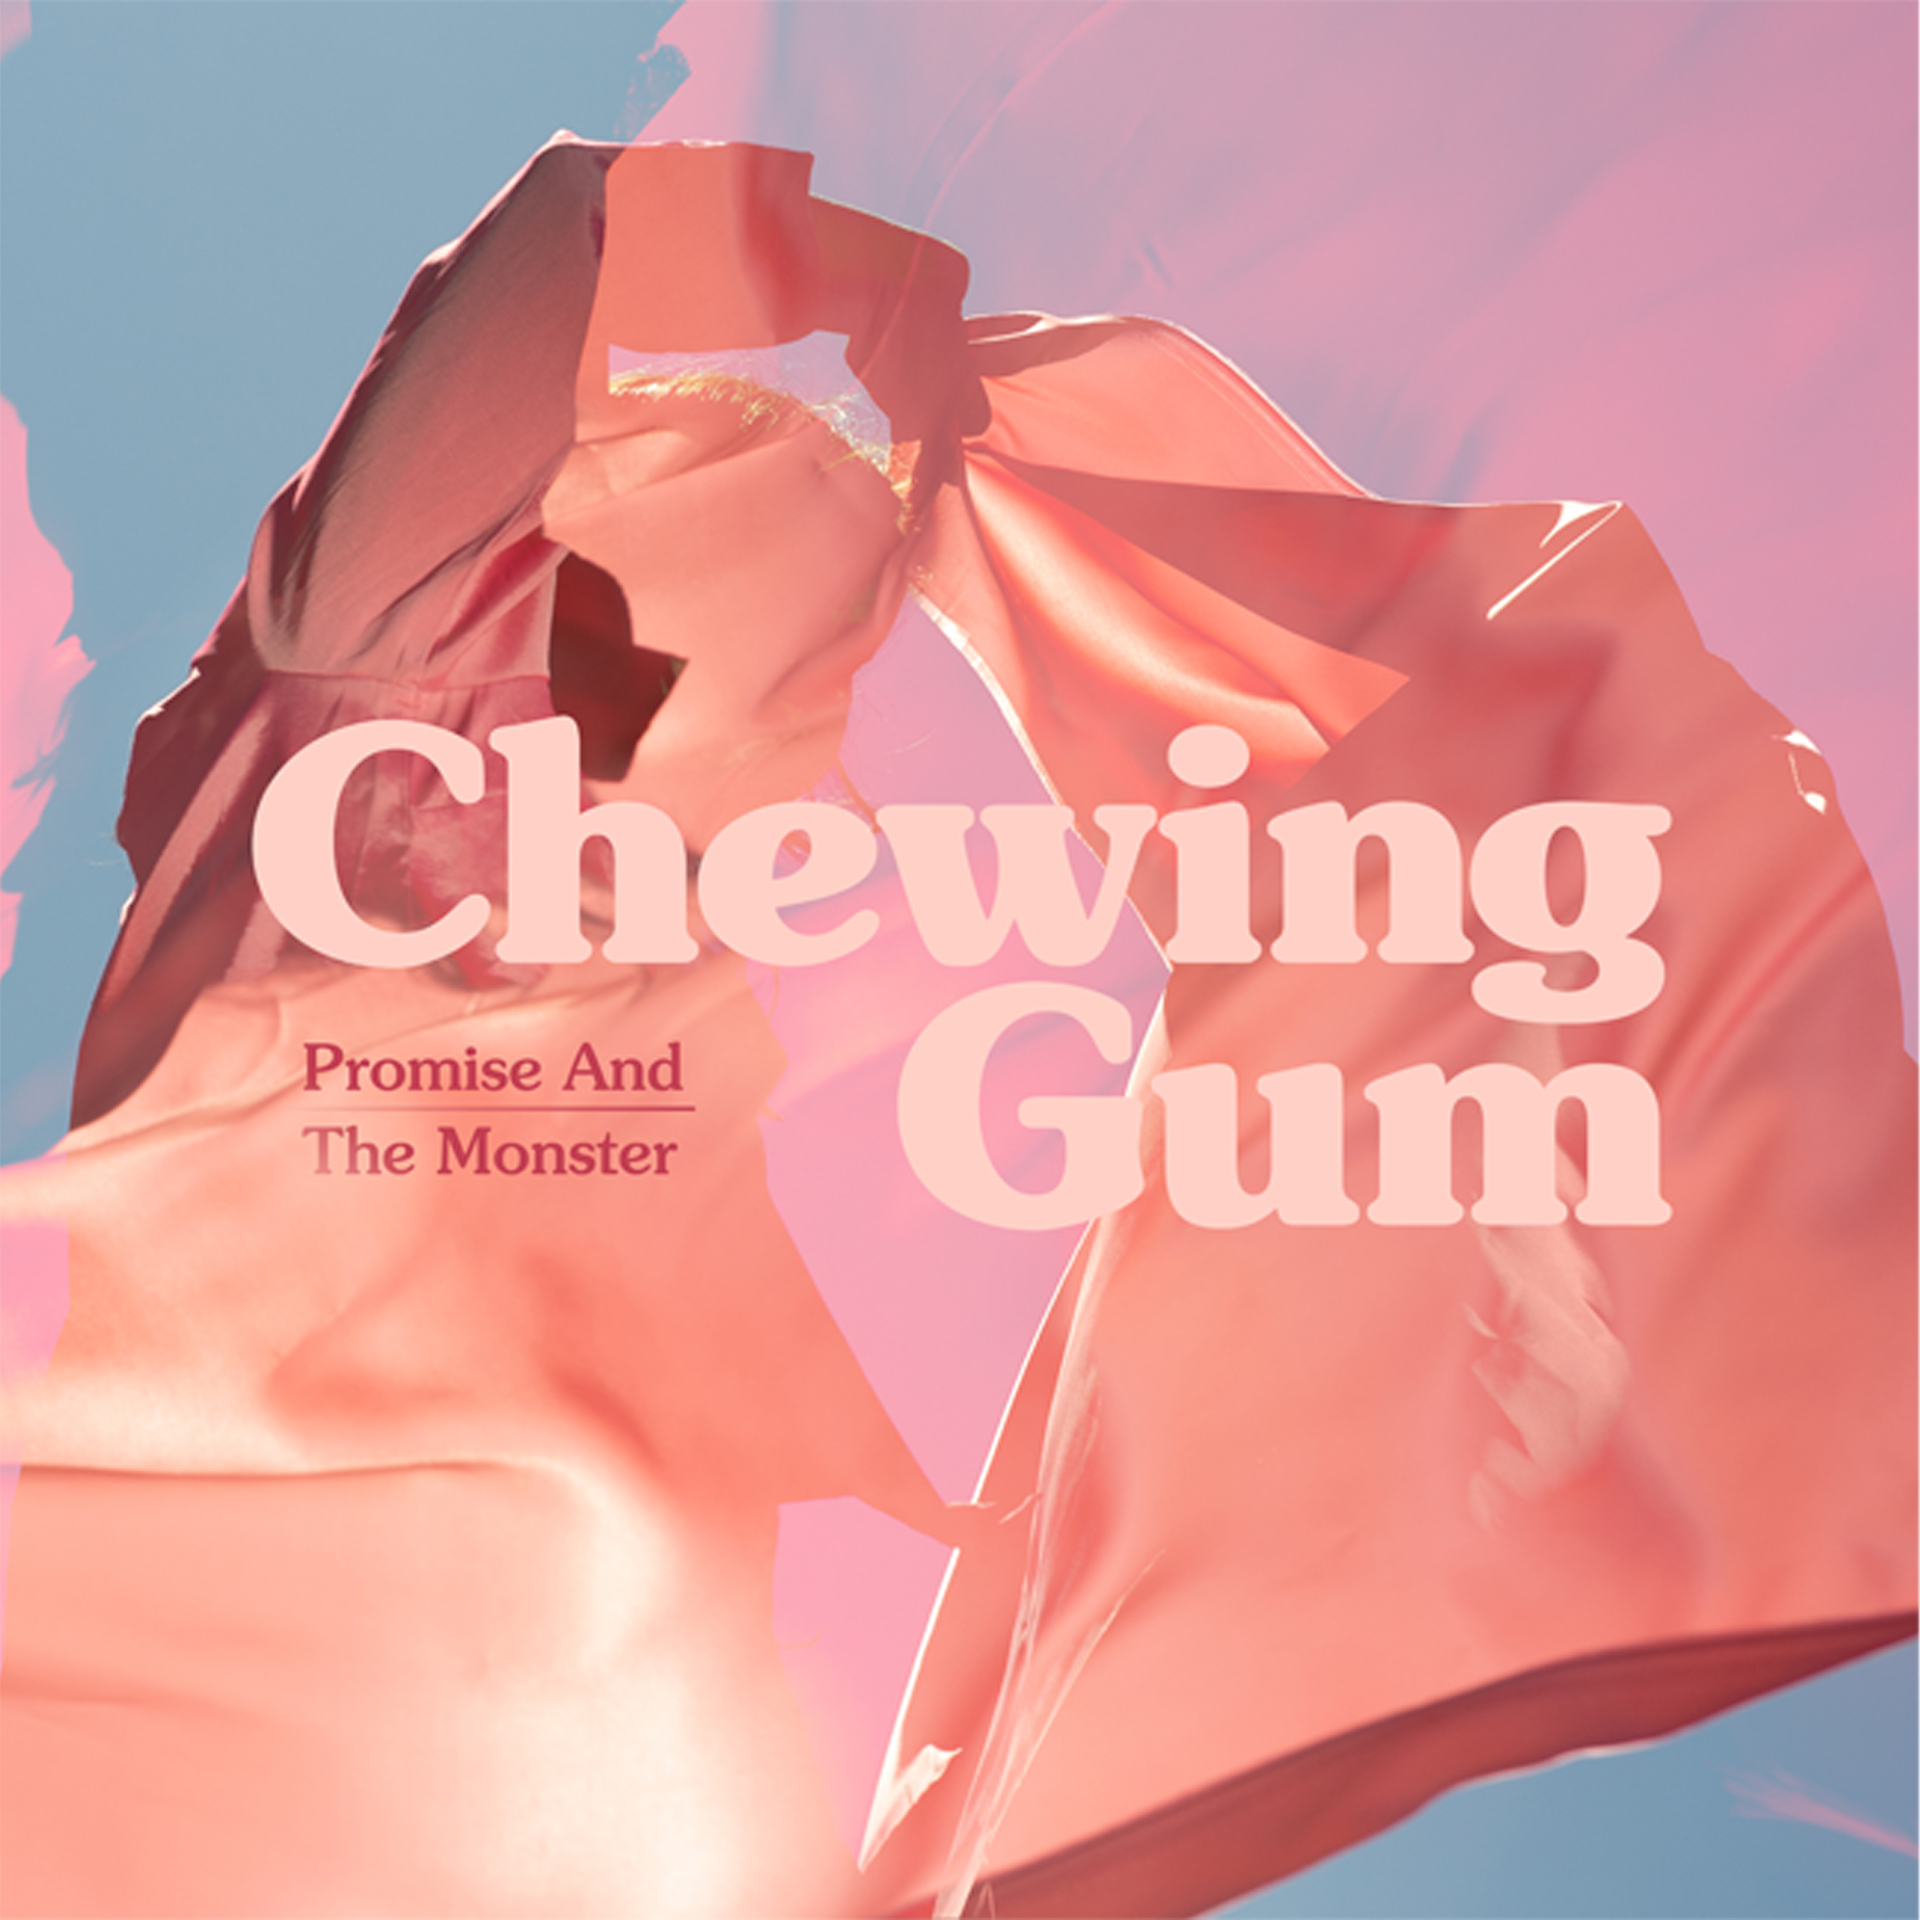 Promise And The Monster (Chewing Gum)